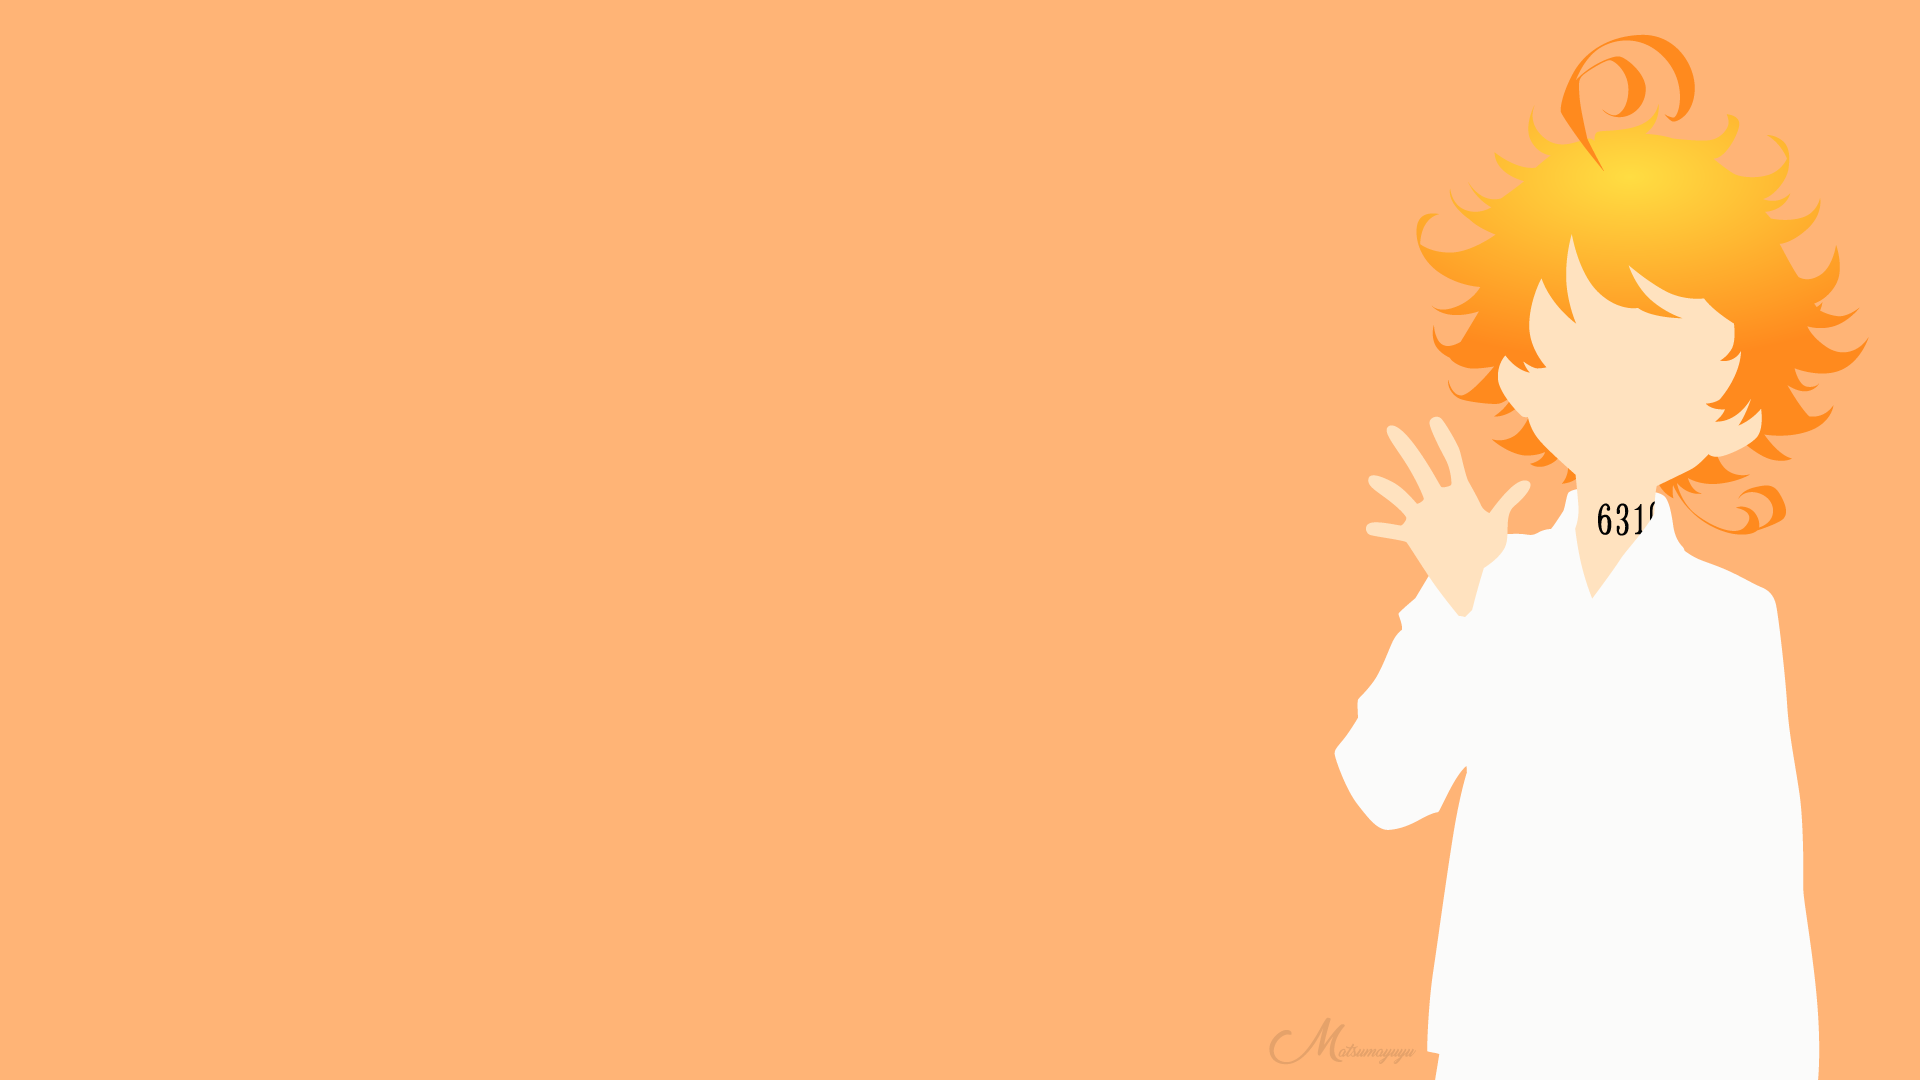 Emma From The Promised Neverland HD Wallpaper Background Image